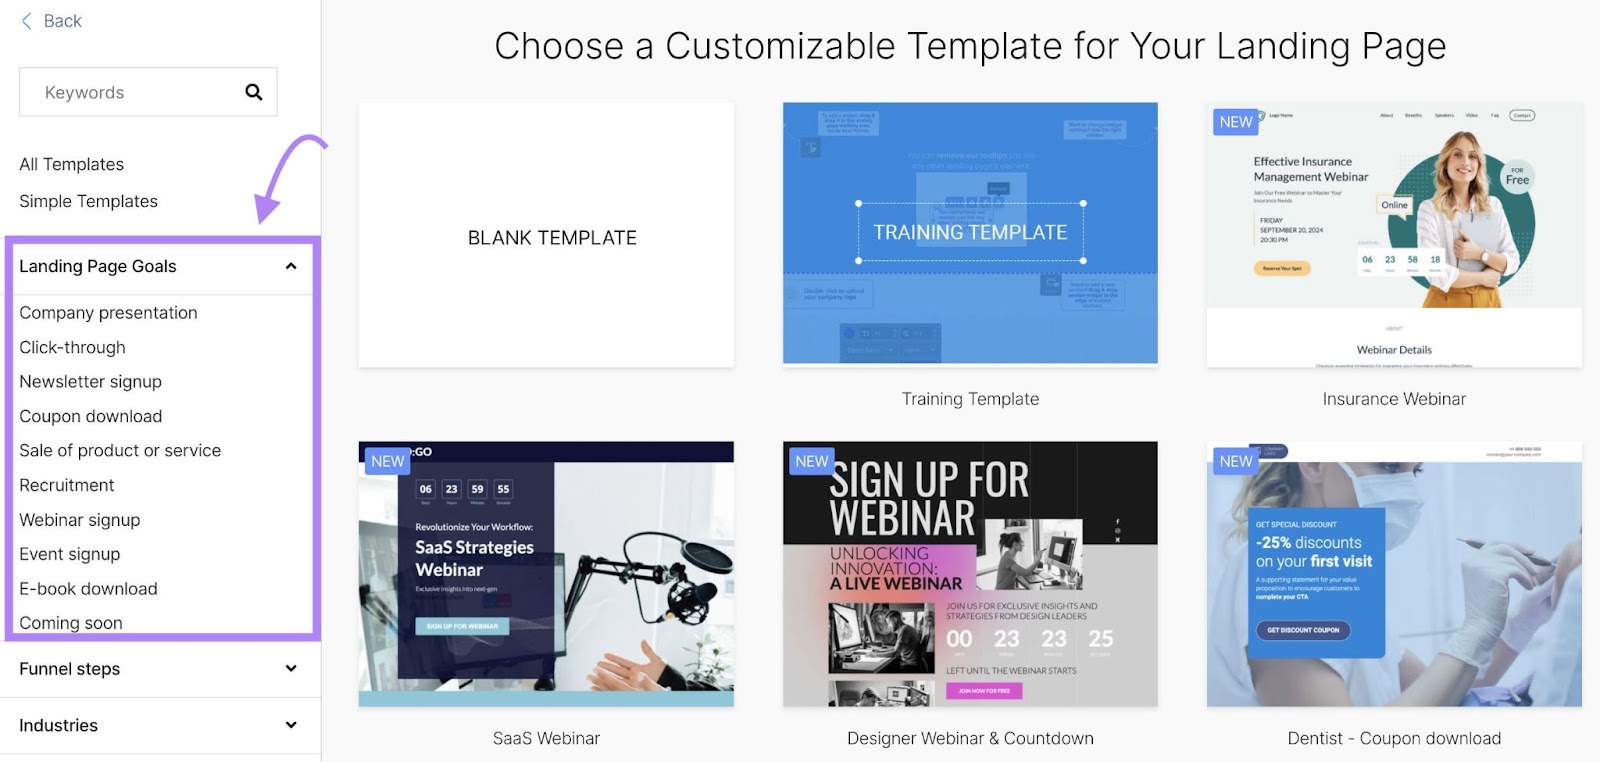 A selection of customizable templates to choose from in the Semrush Landing Page Builder tool, along with "Landing Page Goals" on the left-side column highlighted